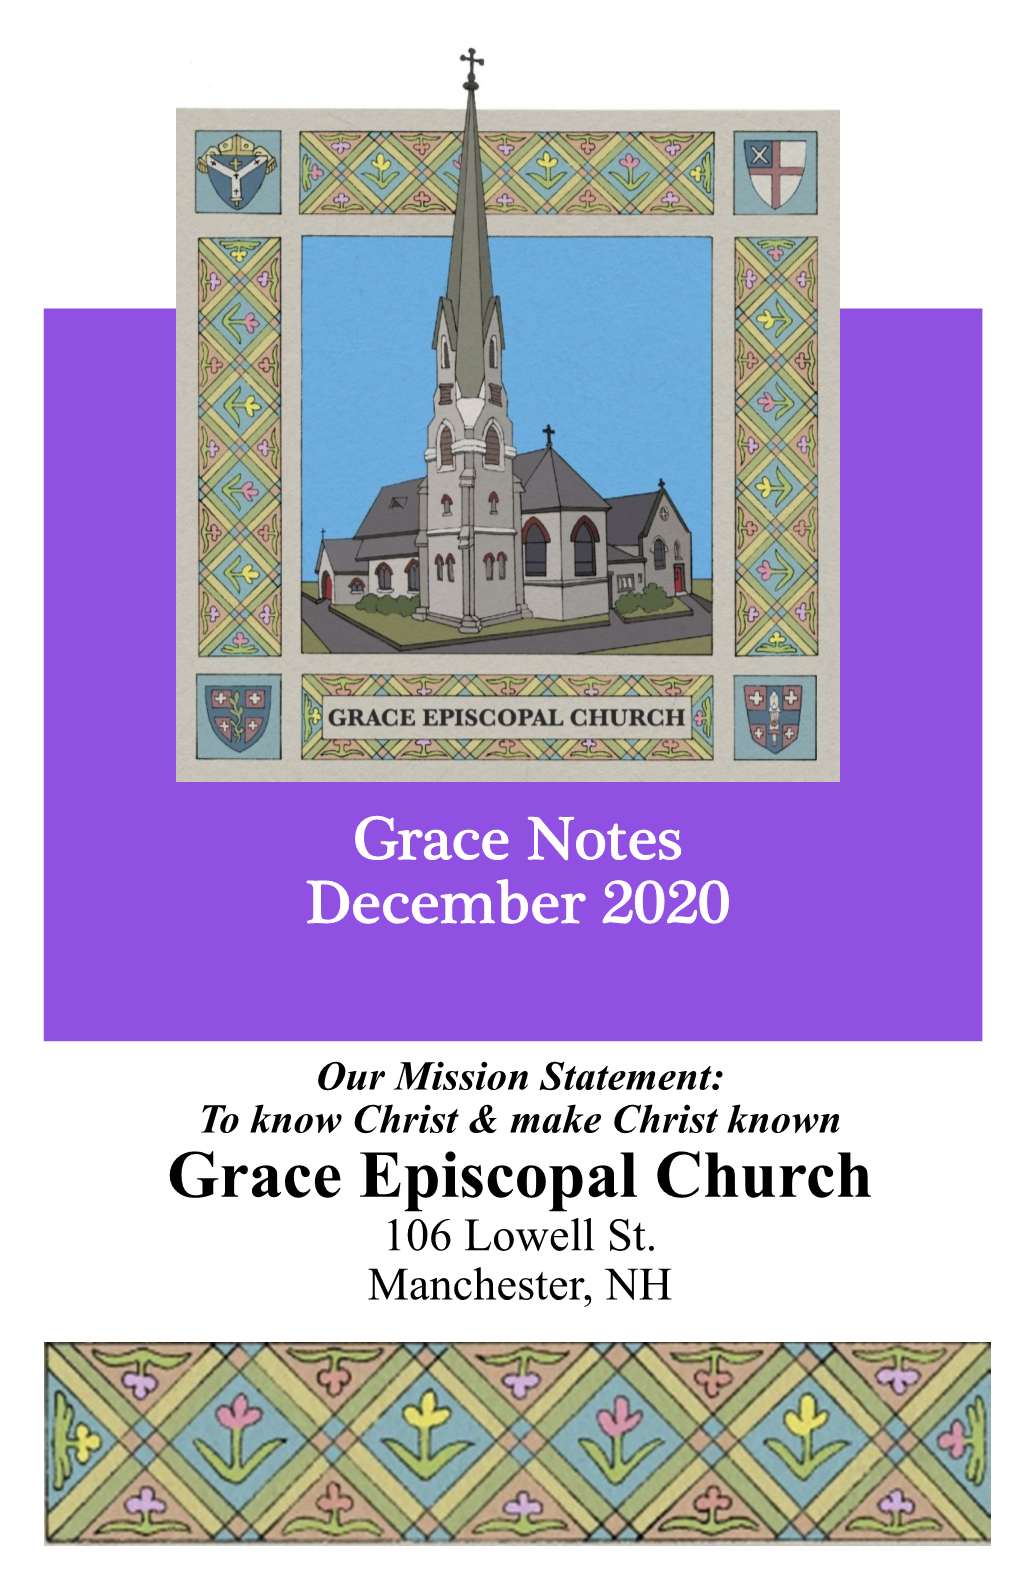 Download December Grace Notes Here